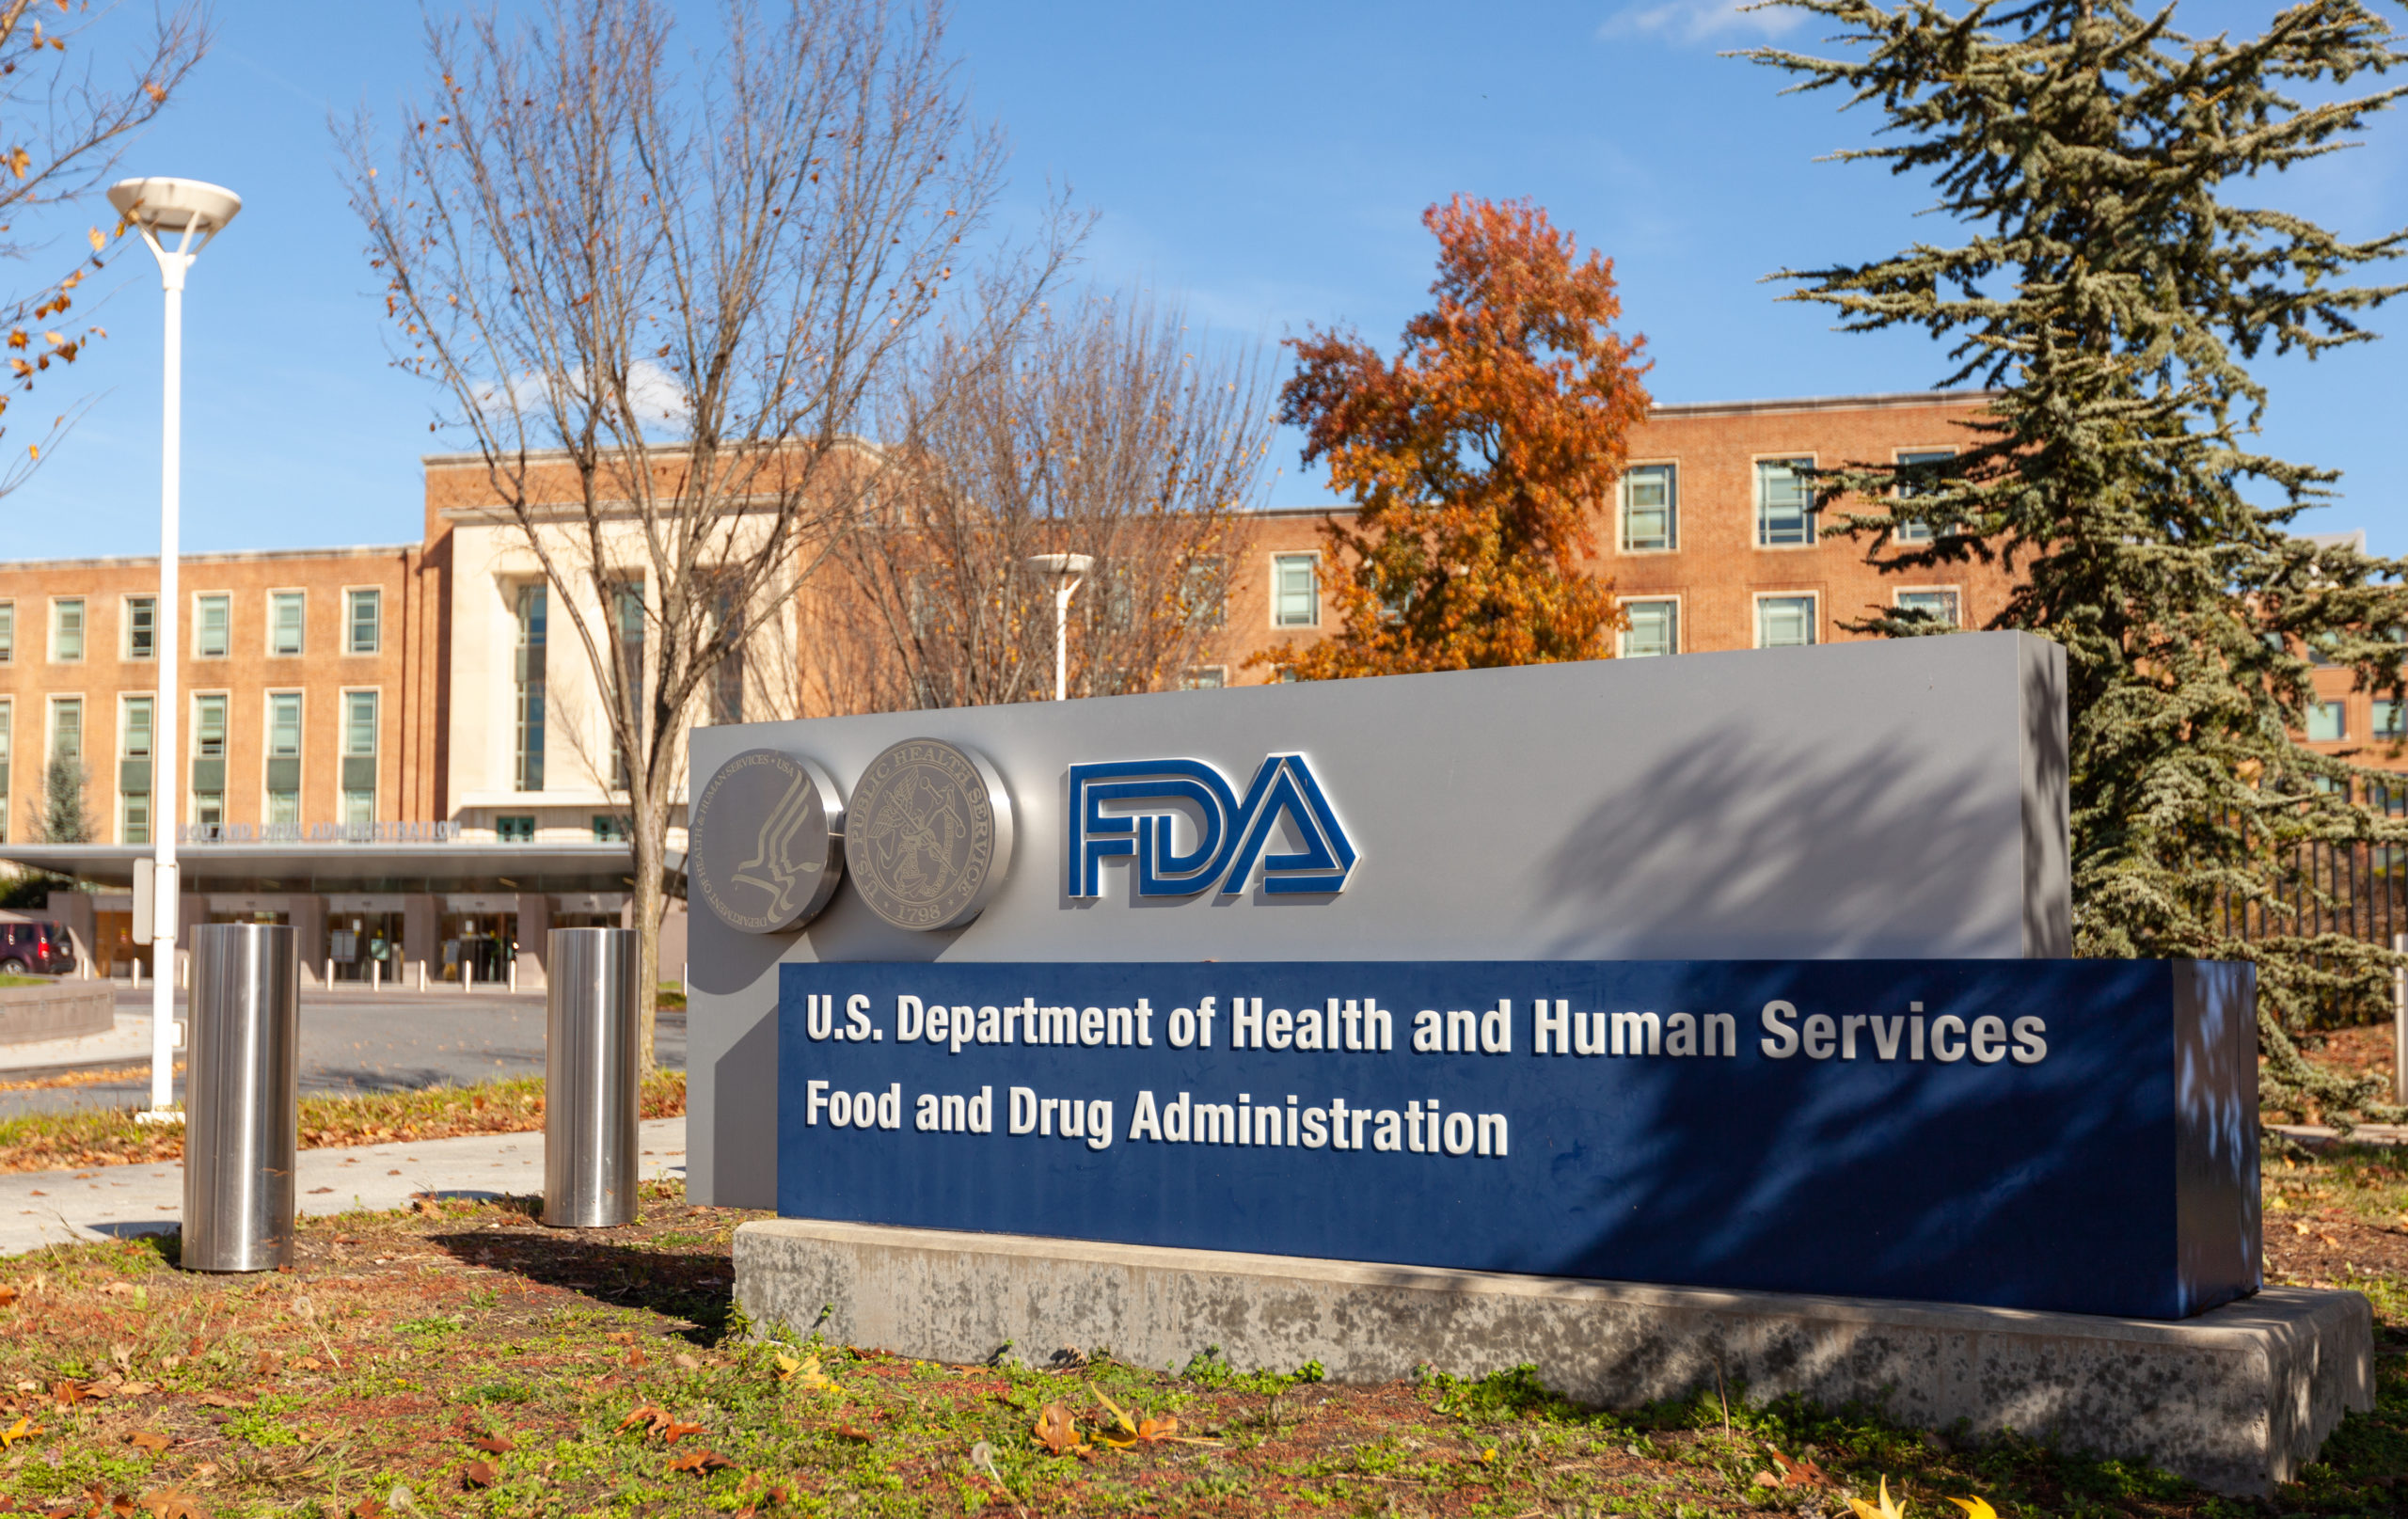 Sign outside the FDA reading: U.S. Department of Health and Human Services Food and Drug Administration